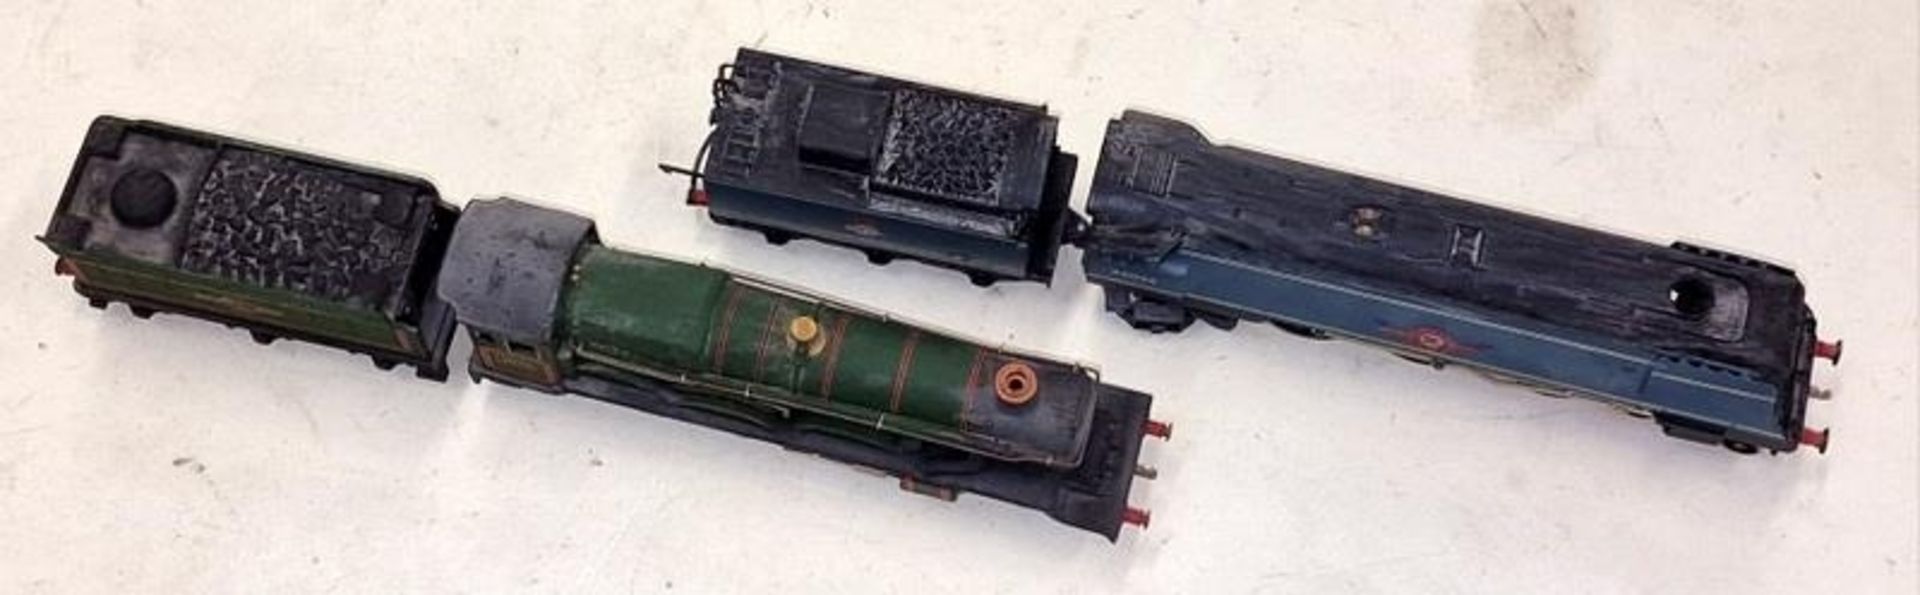 Two OO Gauge locomotives and tenders to include Cardiff Castle 4075 and British Railways Lamport & - Image 2 of 4